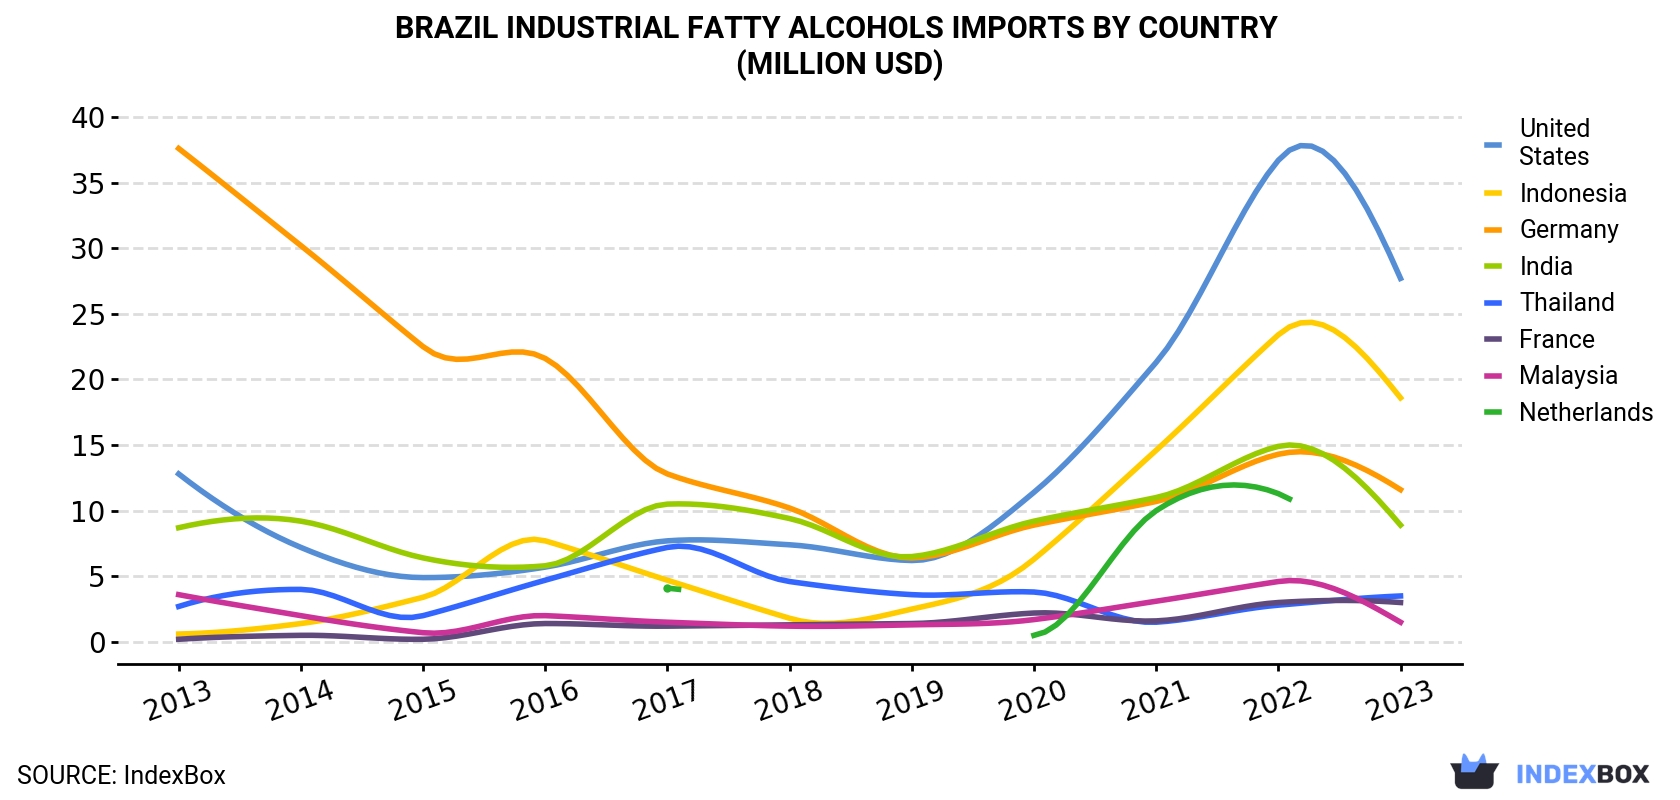 Brazil Industrial Fatty Alcohols Imports By Country (Million USD)